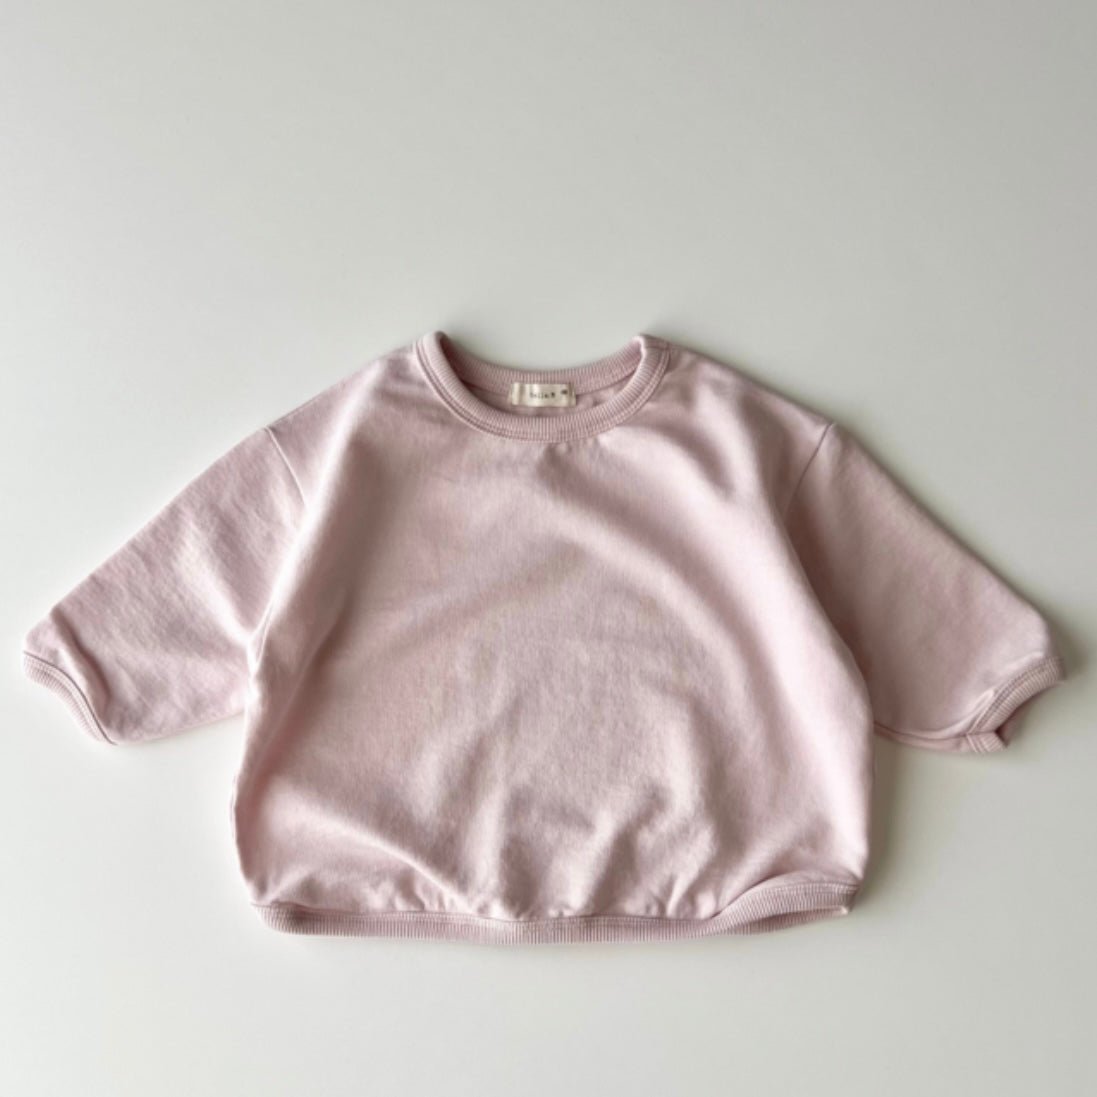 Bam Bam Tee - Dusty Rose find Stylish Fashion for Little People- at Little Foxx Concept Store